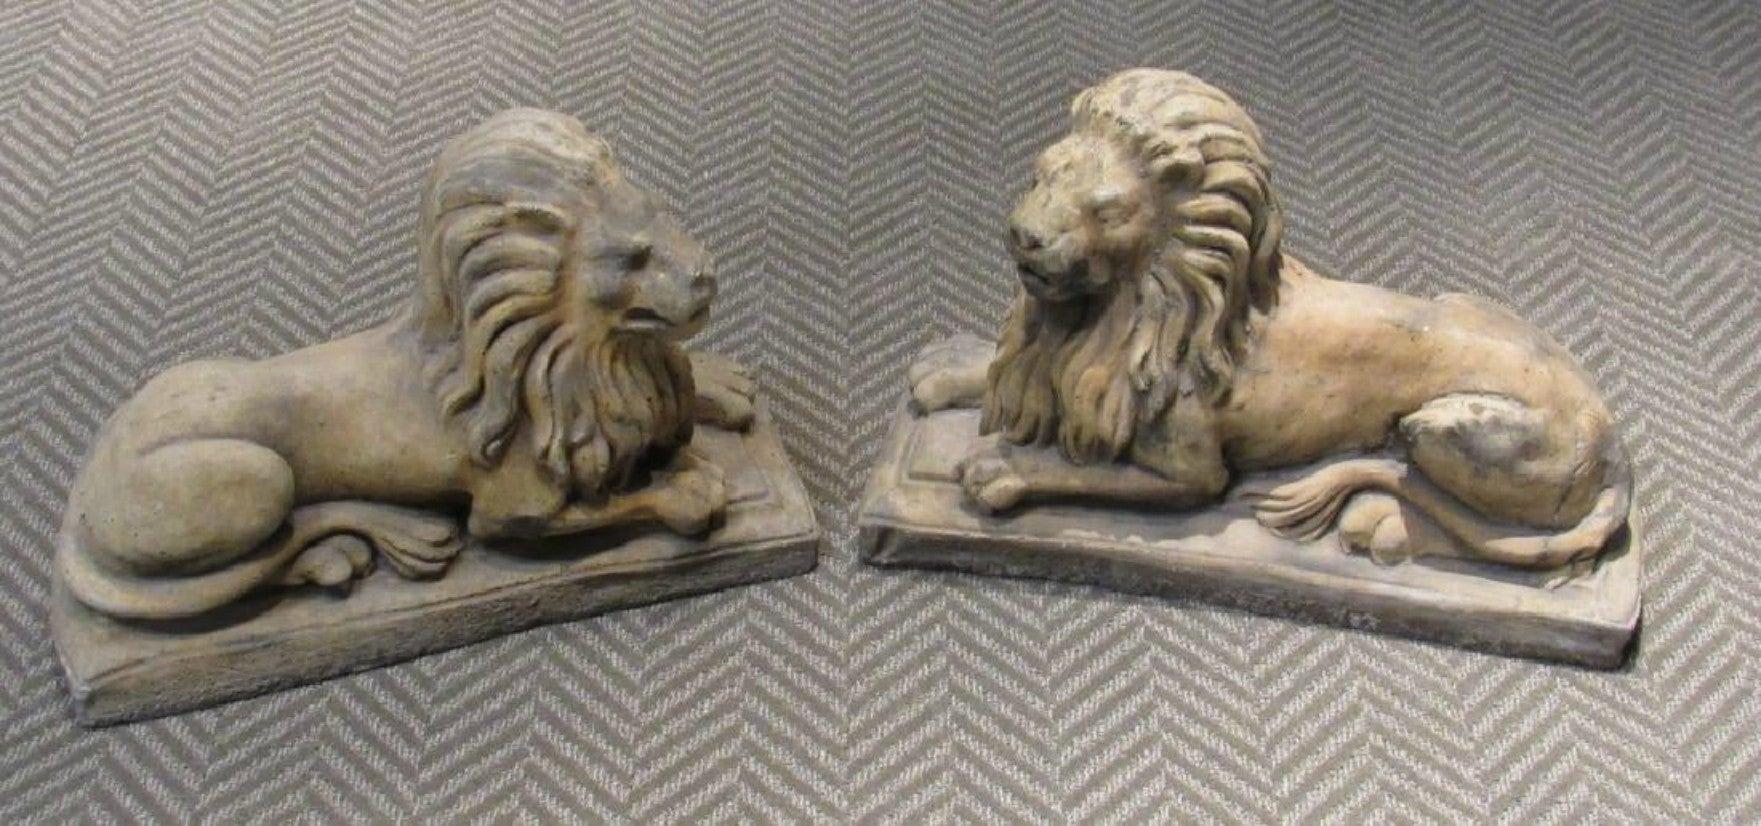 A pair of magnificent lion statues, opposing, cast stone recumbent on plinth bases. The pair of would be a wonderful addition to an entrance, garden or any living space.
       